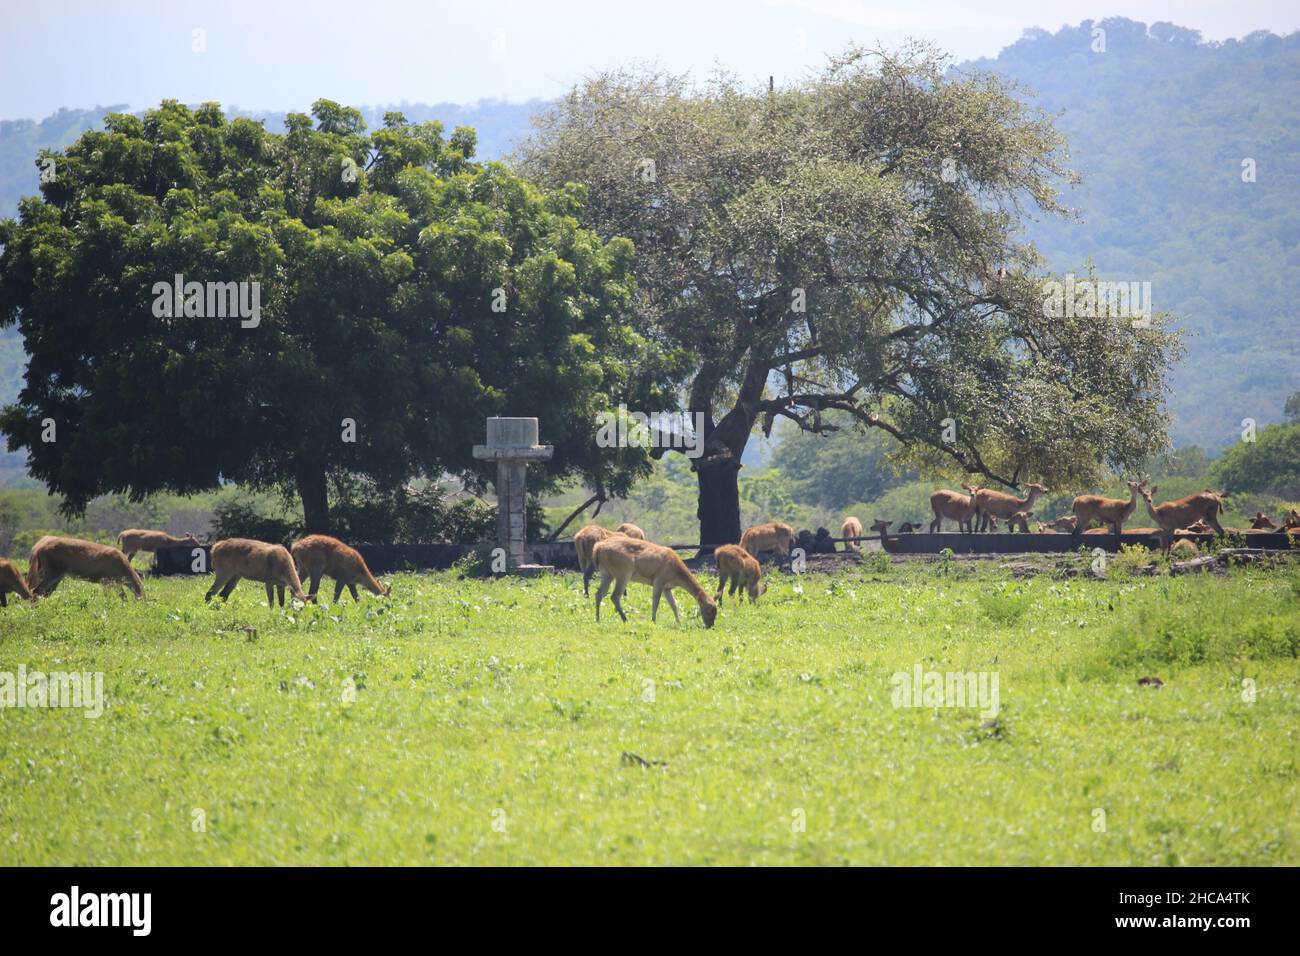 The atmosphere in Baluran National Park in Situbondo Regency is full of various wild animals such as wild deer and buffalo Stock Photo